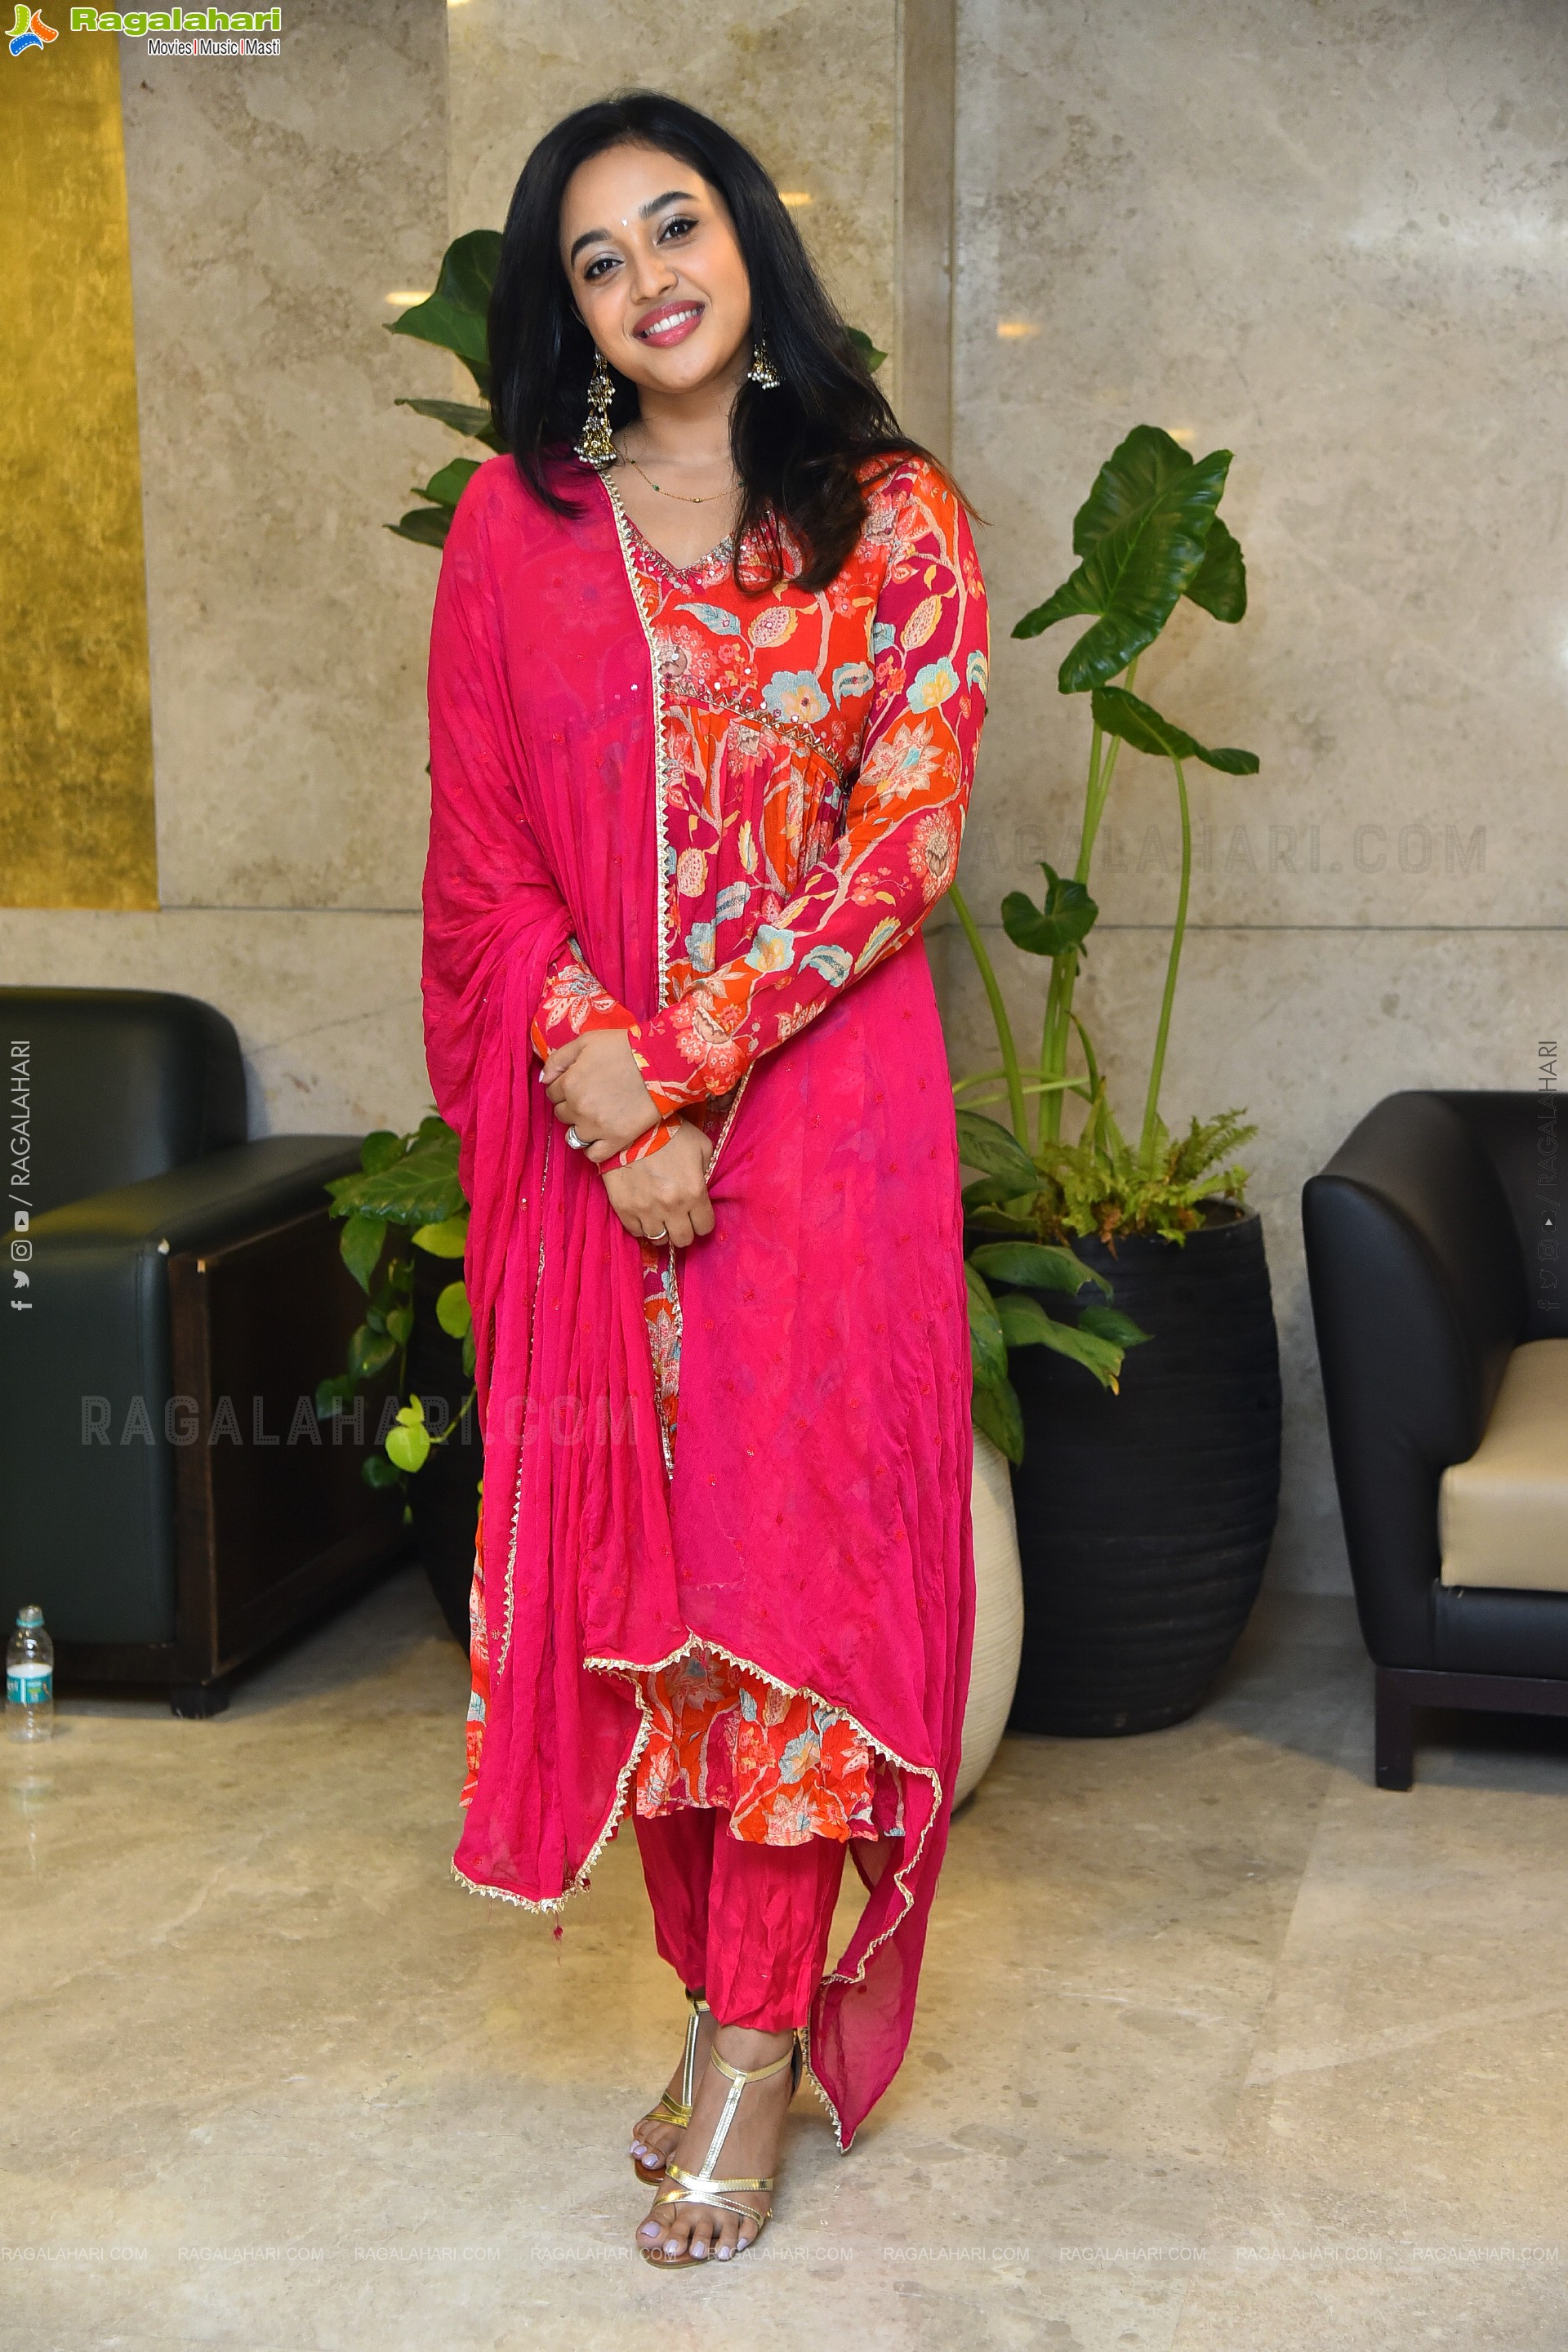 Yasha Shivakumar at Vey Dharuvey Pre Release Event, HD Photo Gallery